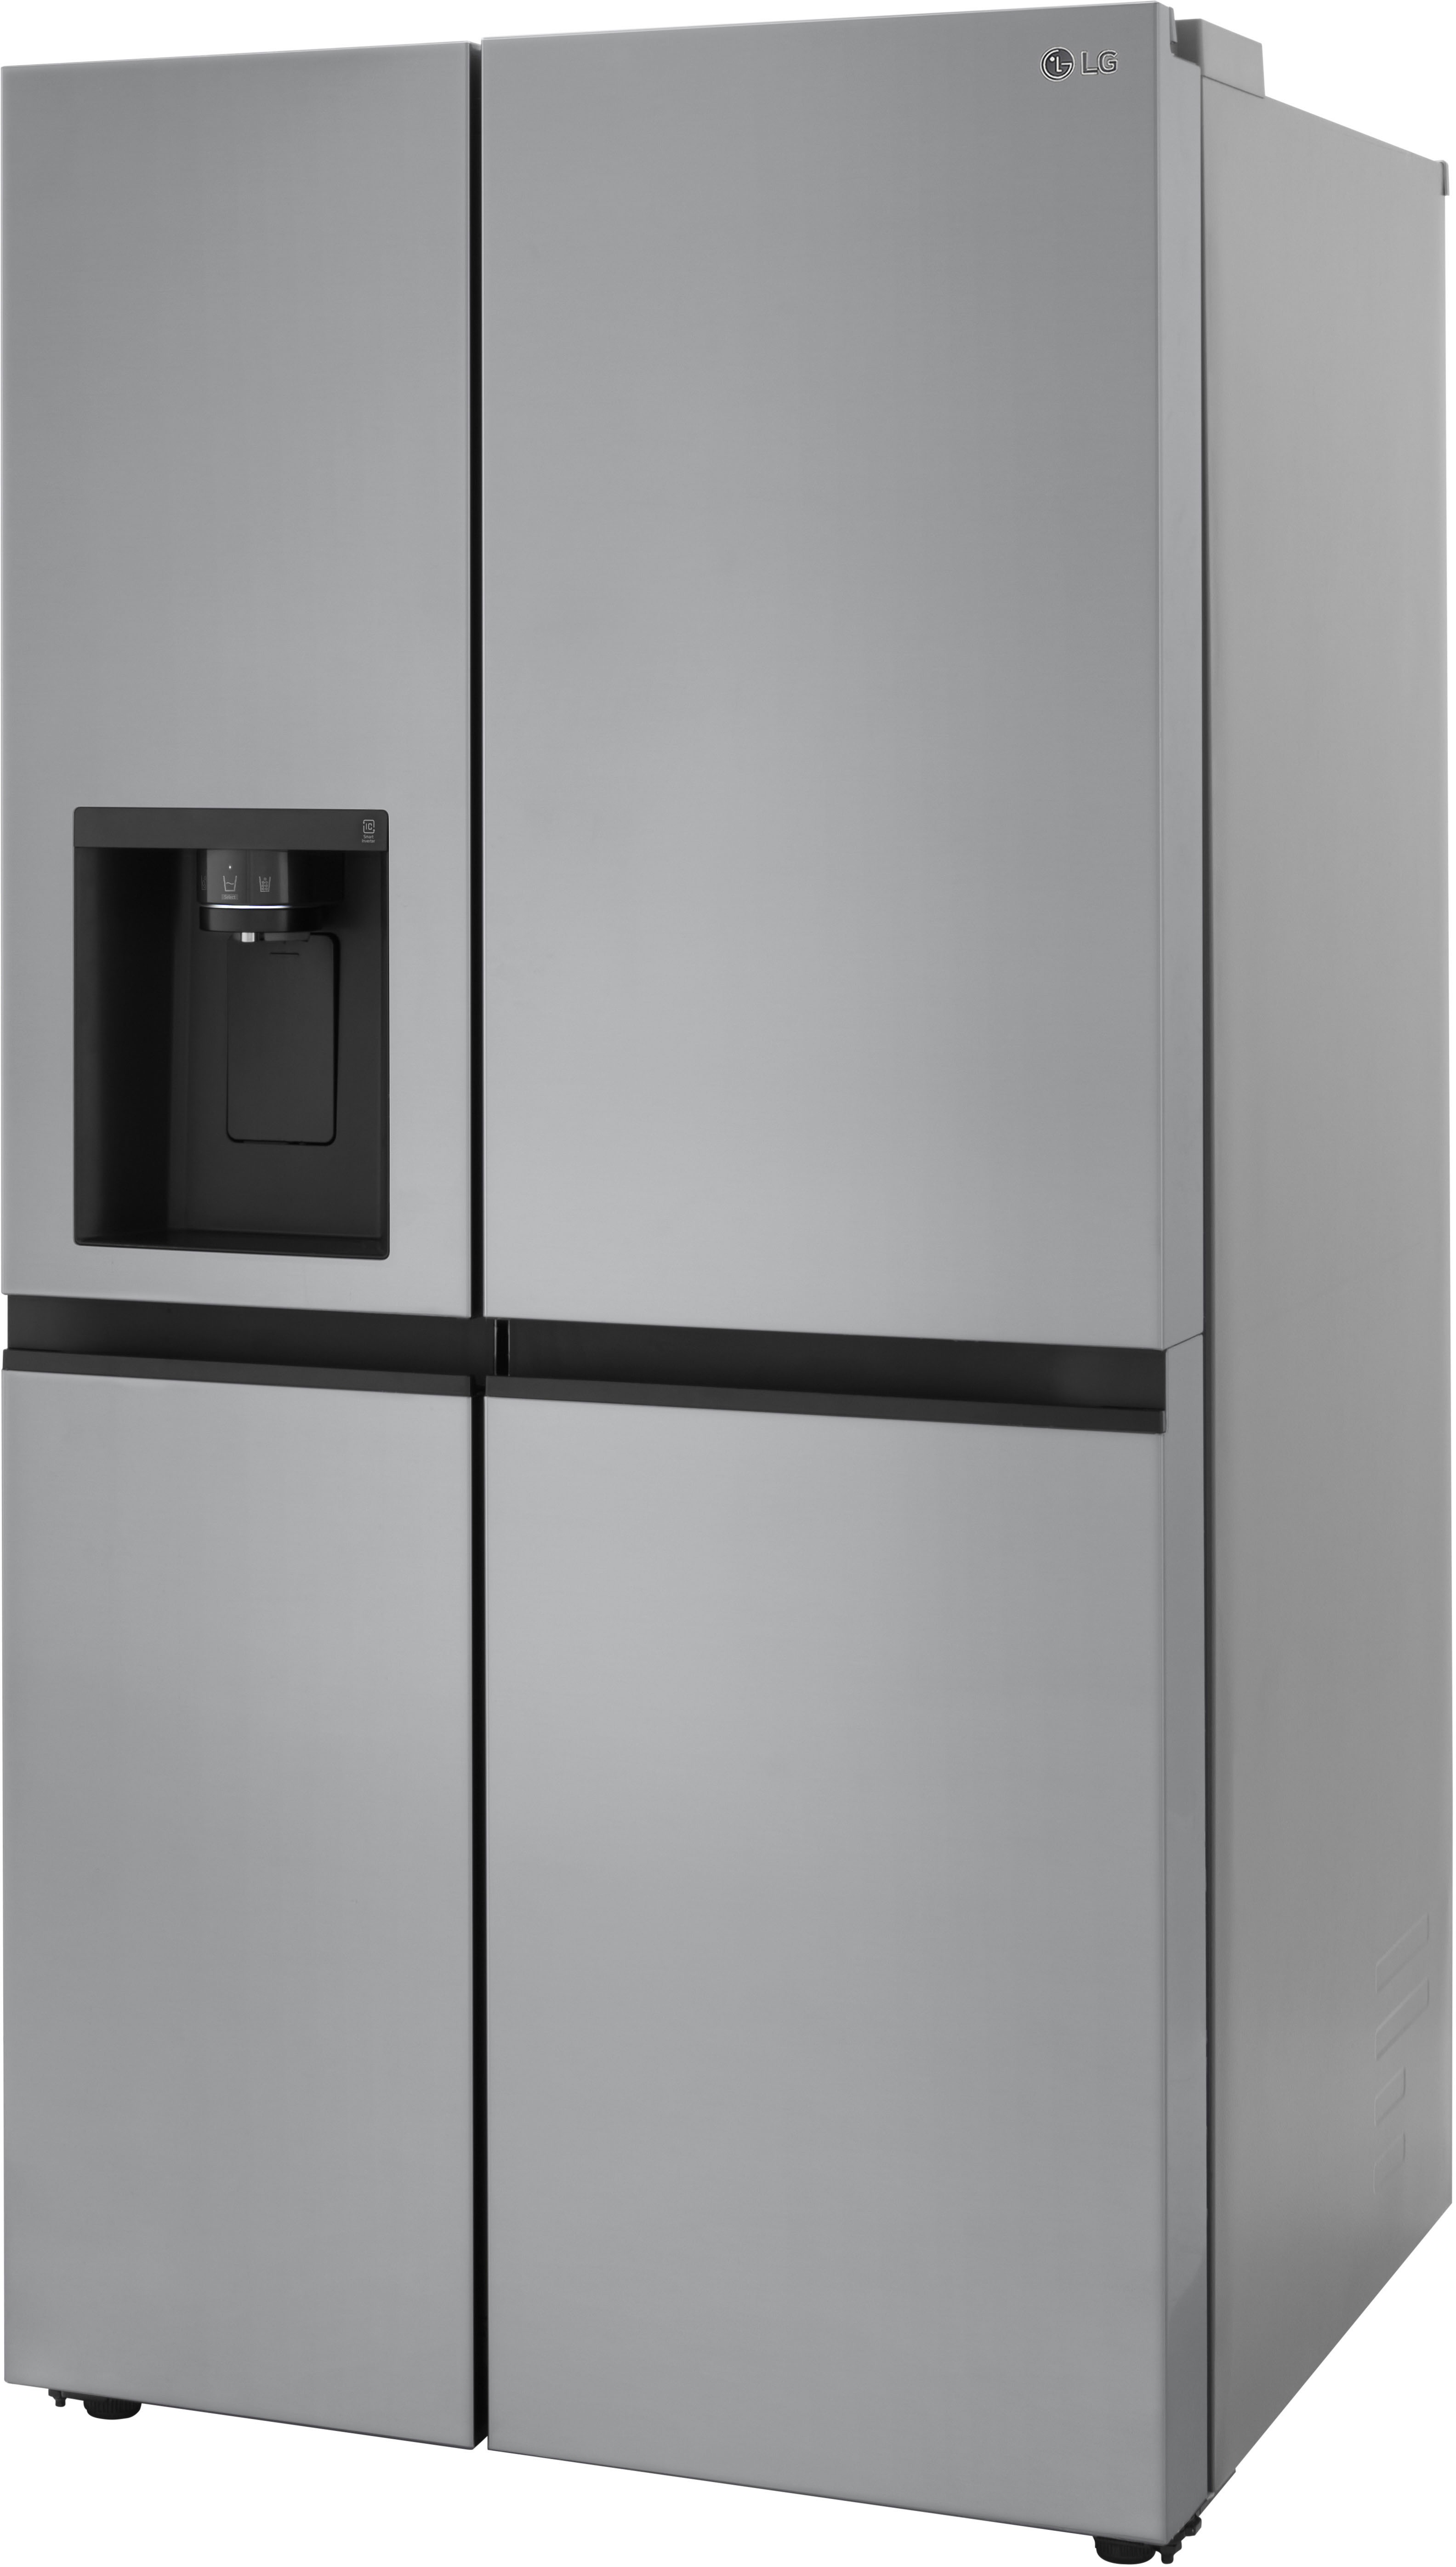 Angle View: Fulgor Milano - Milano Stainless Steel French Door Refrigerator without Handle - Silver